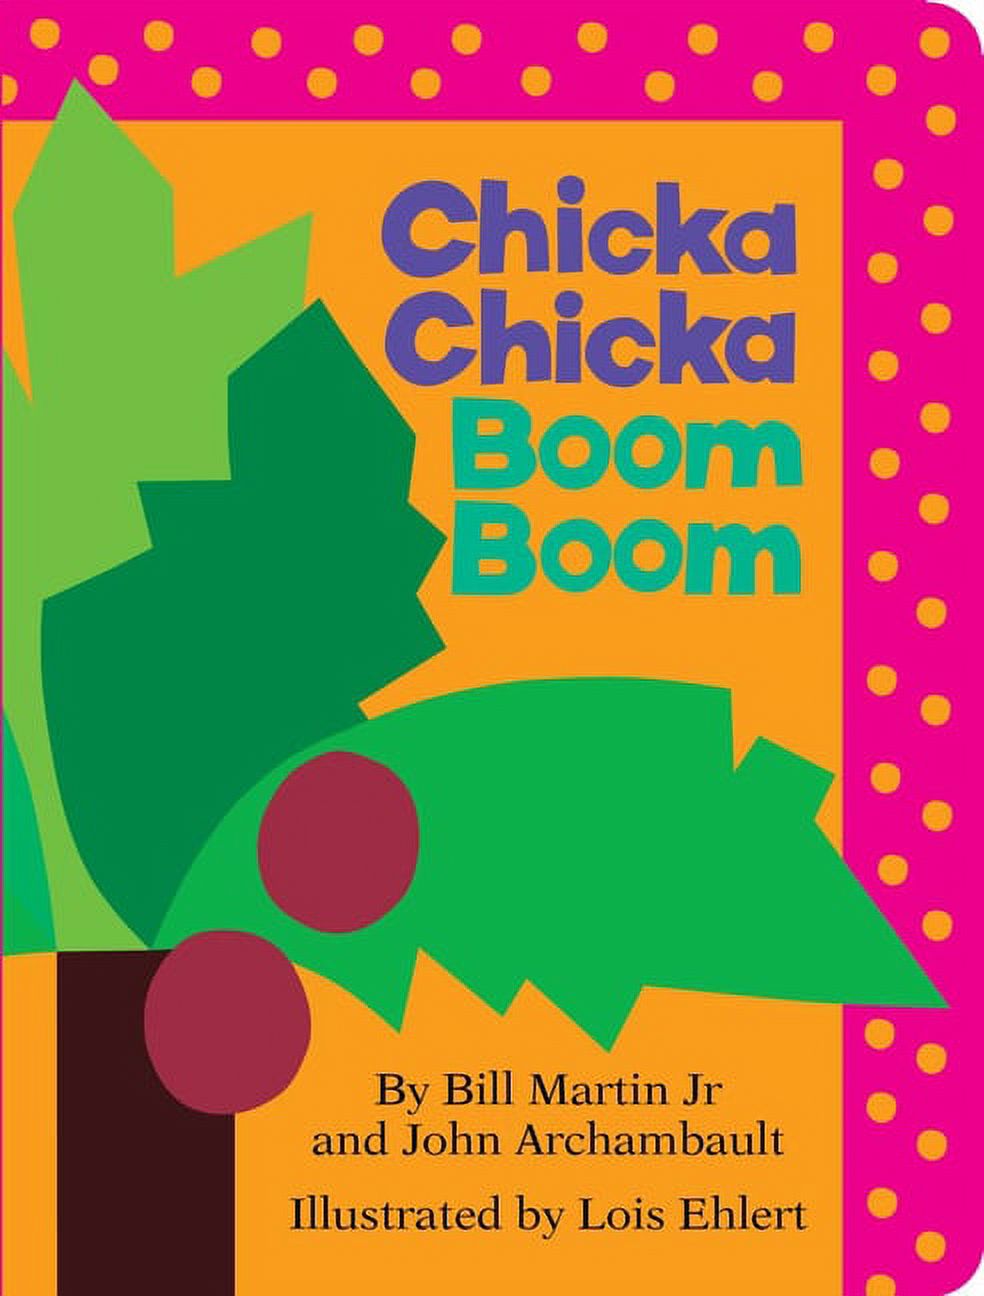 Chicka Chicka Book, A: Chicka Chicka Boom Boom (Board book) - image 1 of 4